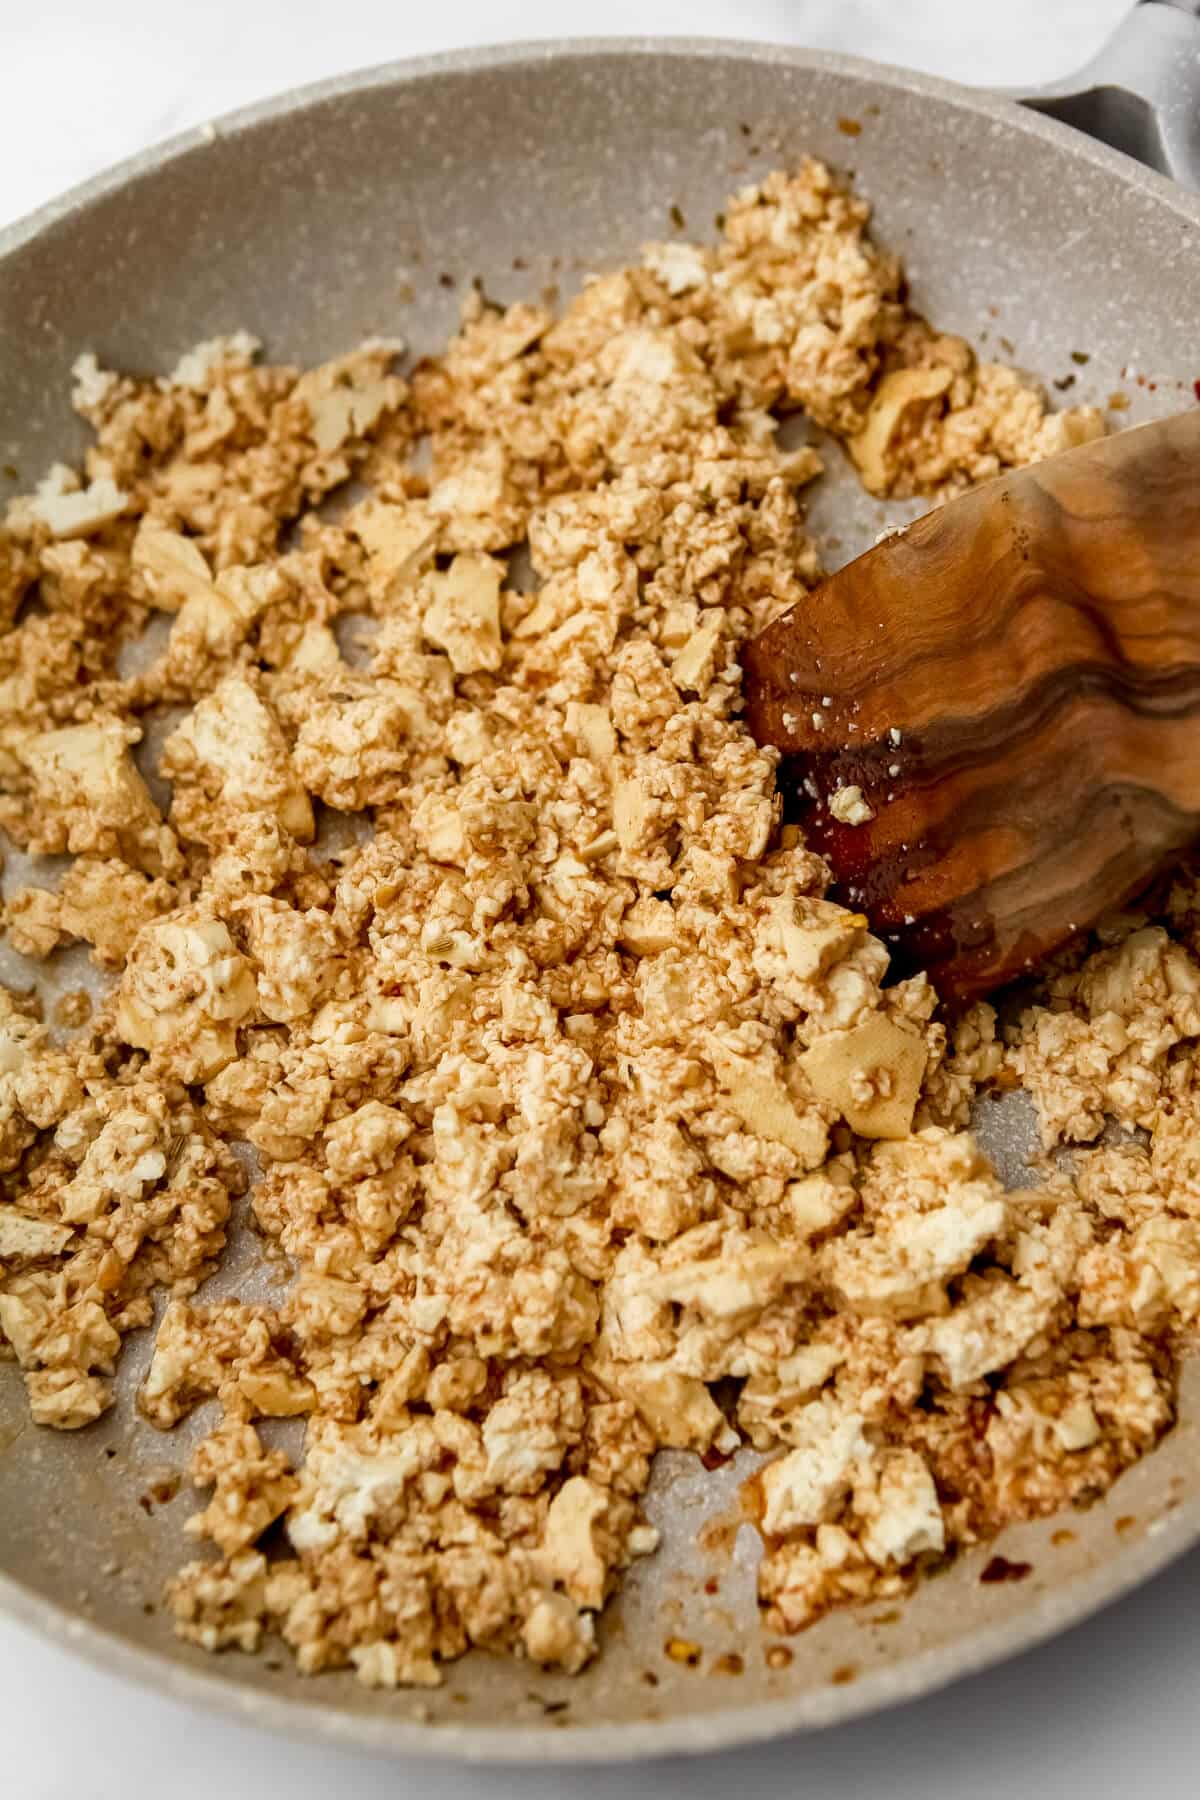 Tofu sausage frying in a pan and being stirred with a wooden spatula.